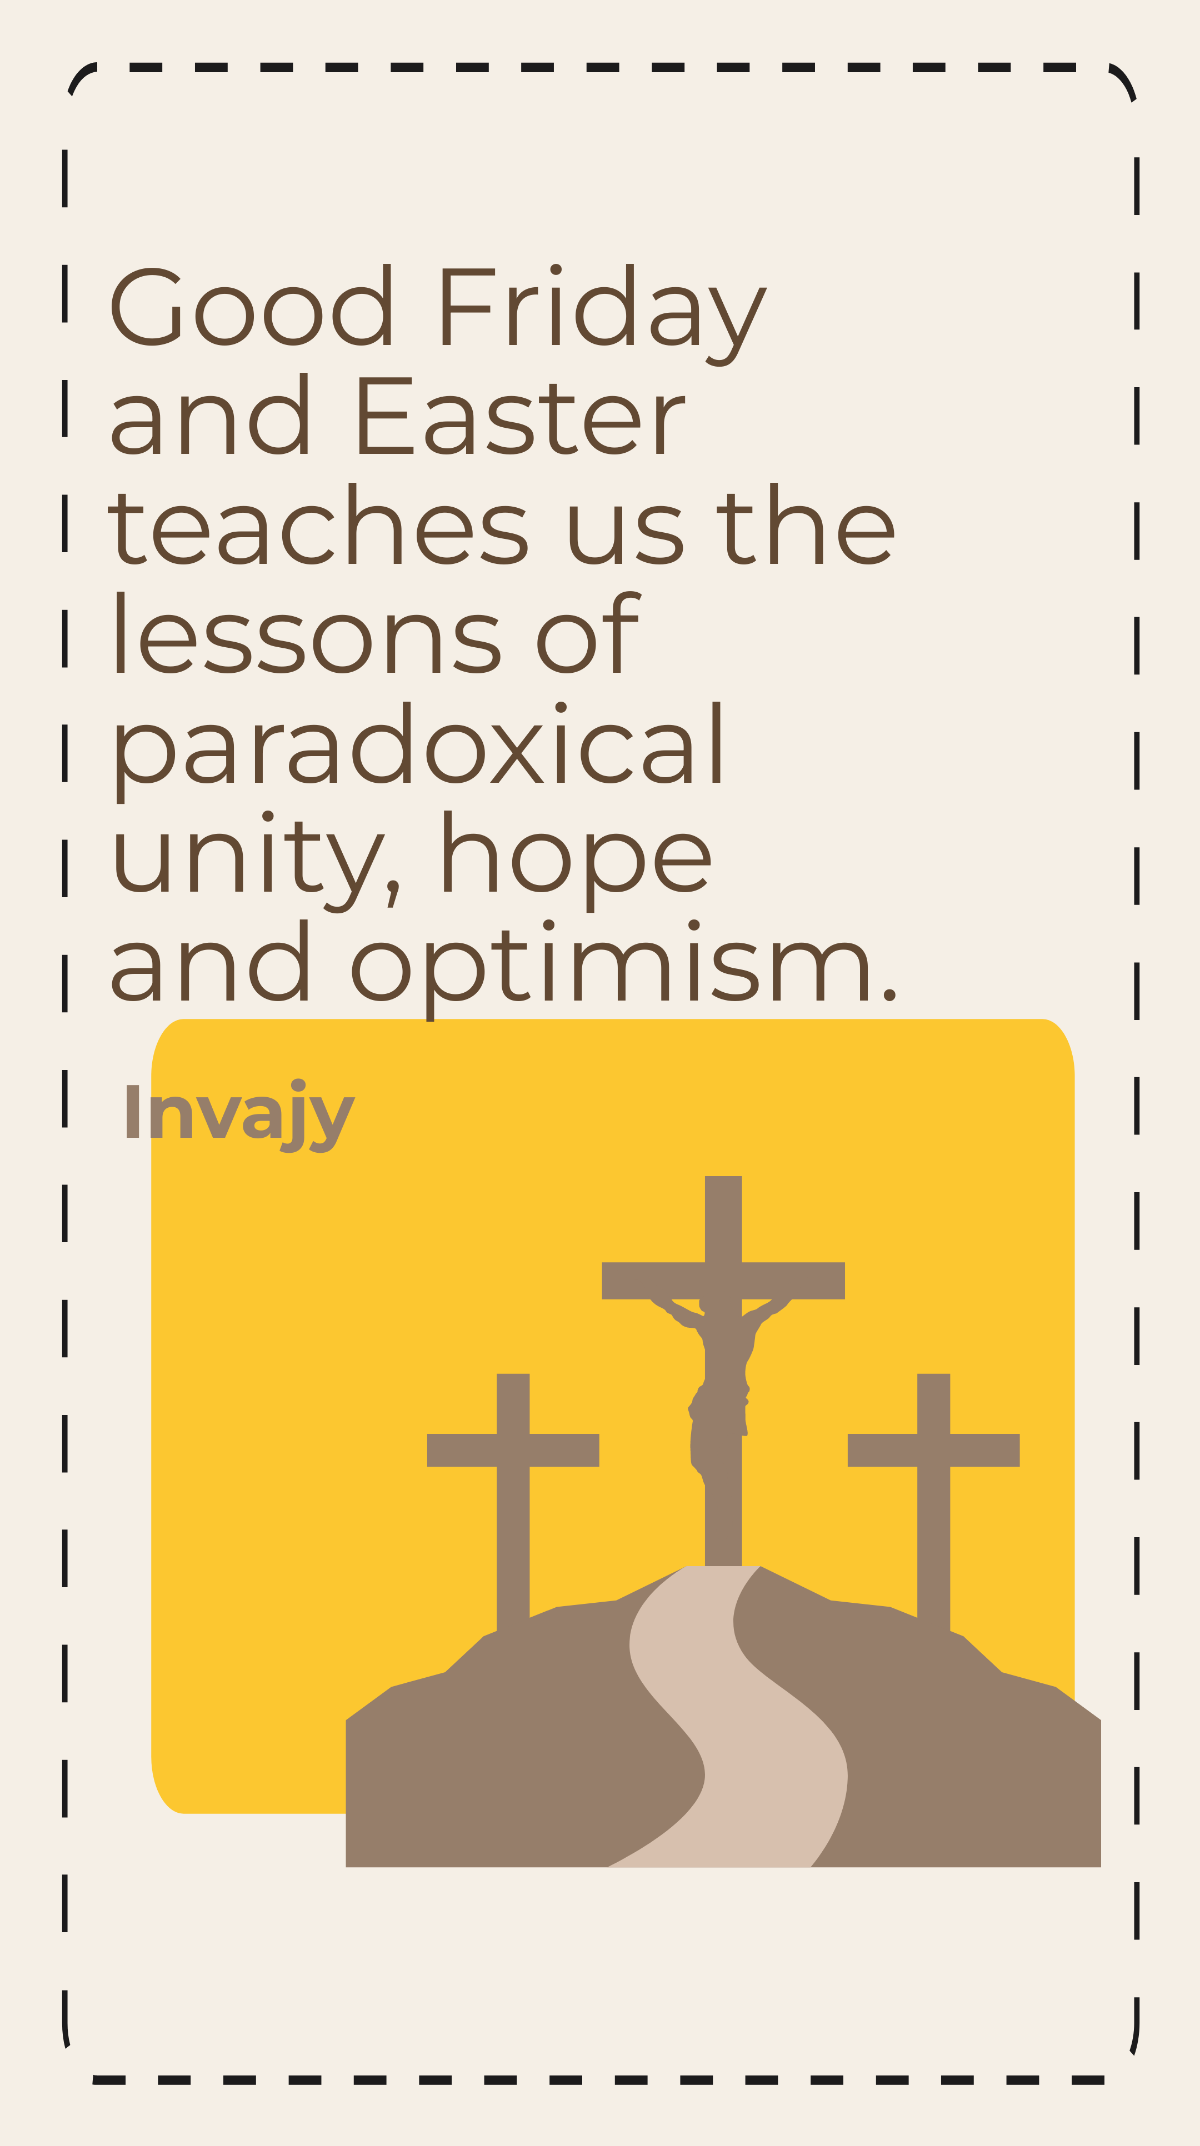 Invajy - Good Friday and Easter teaches us the lessons of paradoxical unity, hope and optimism. Template